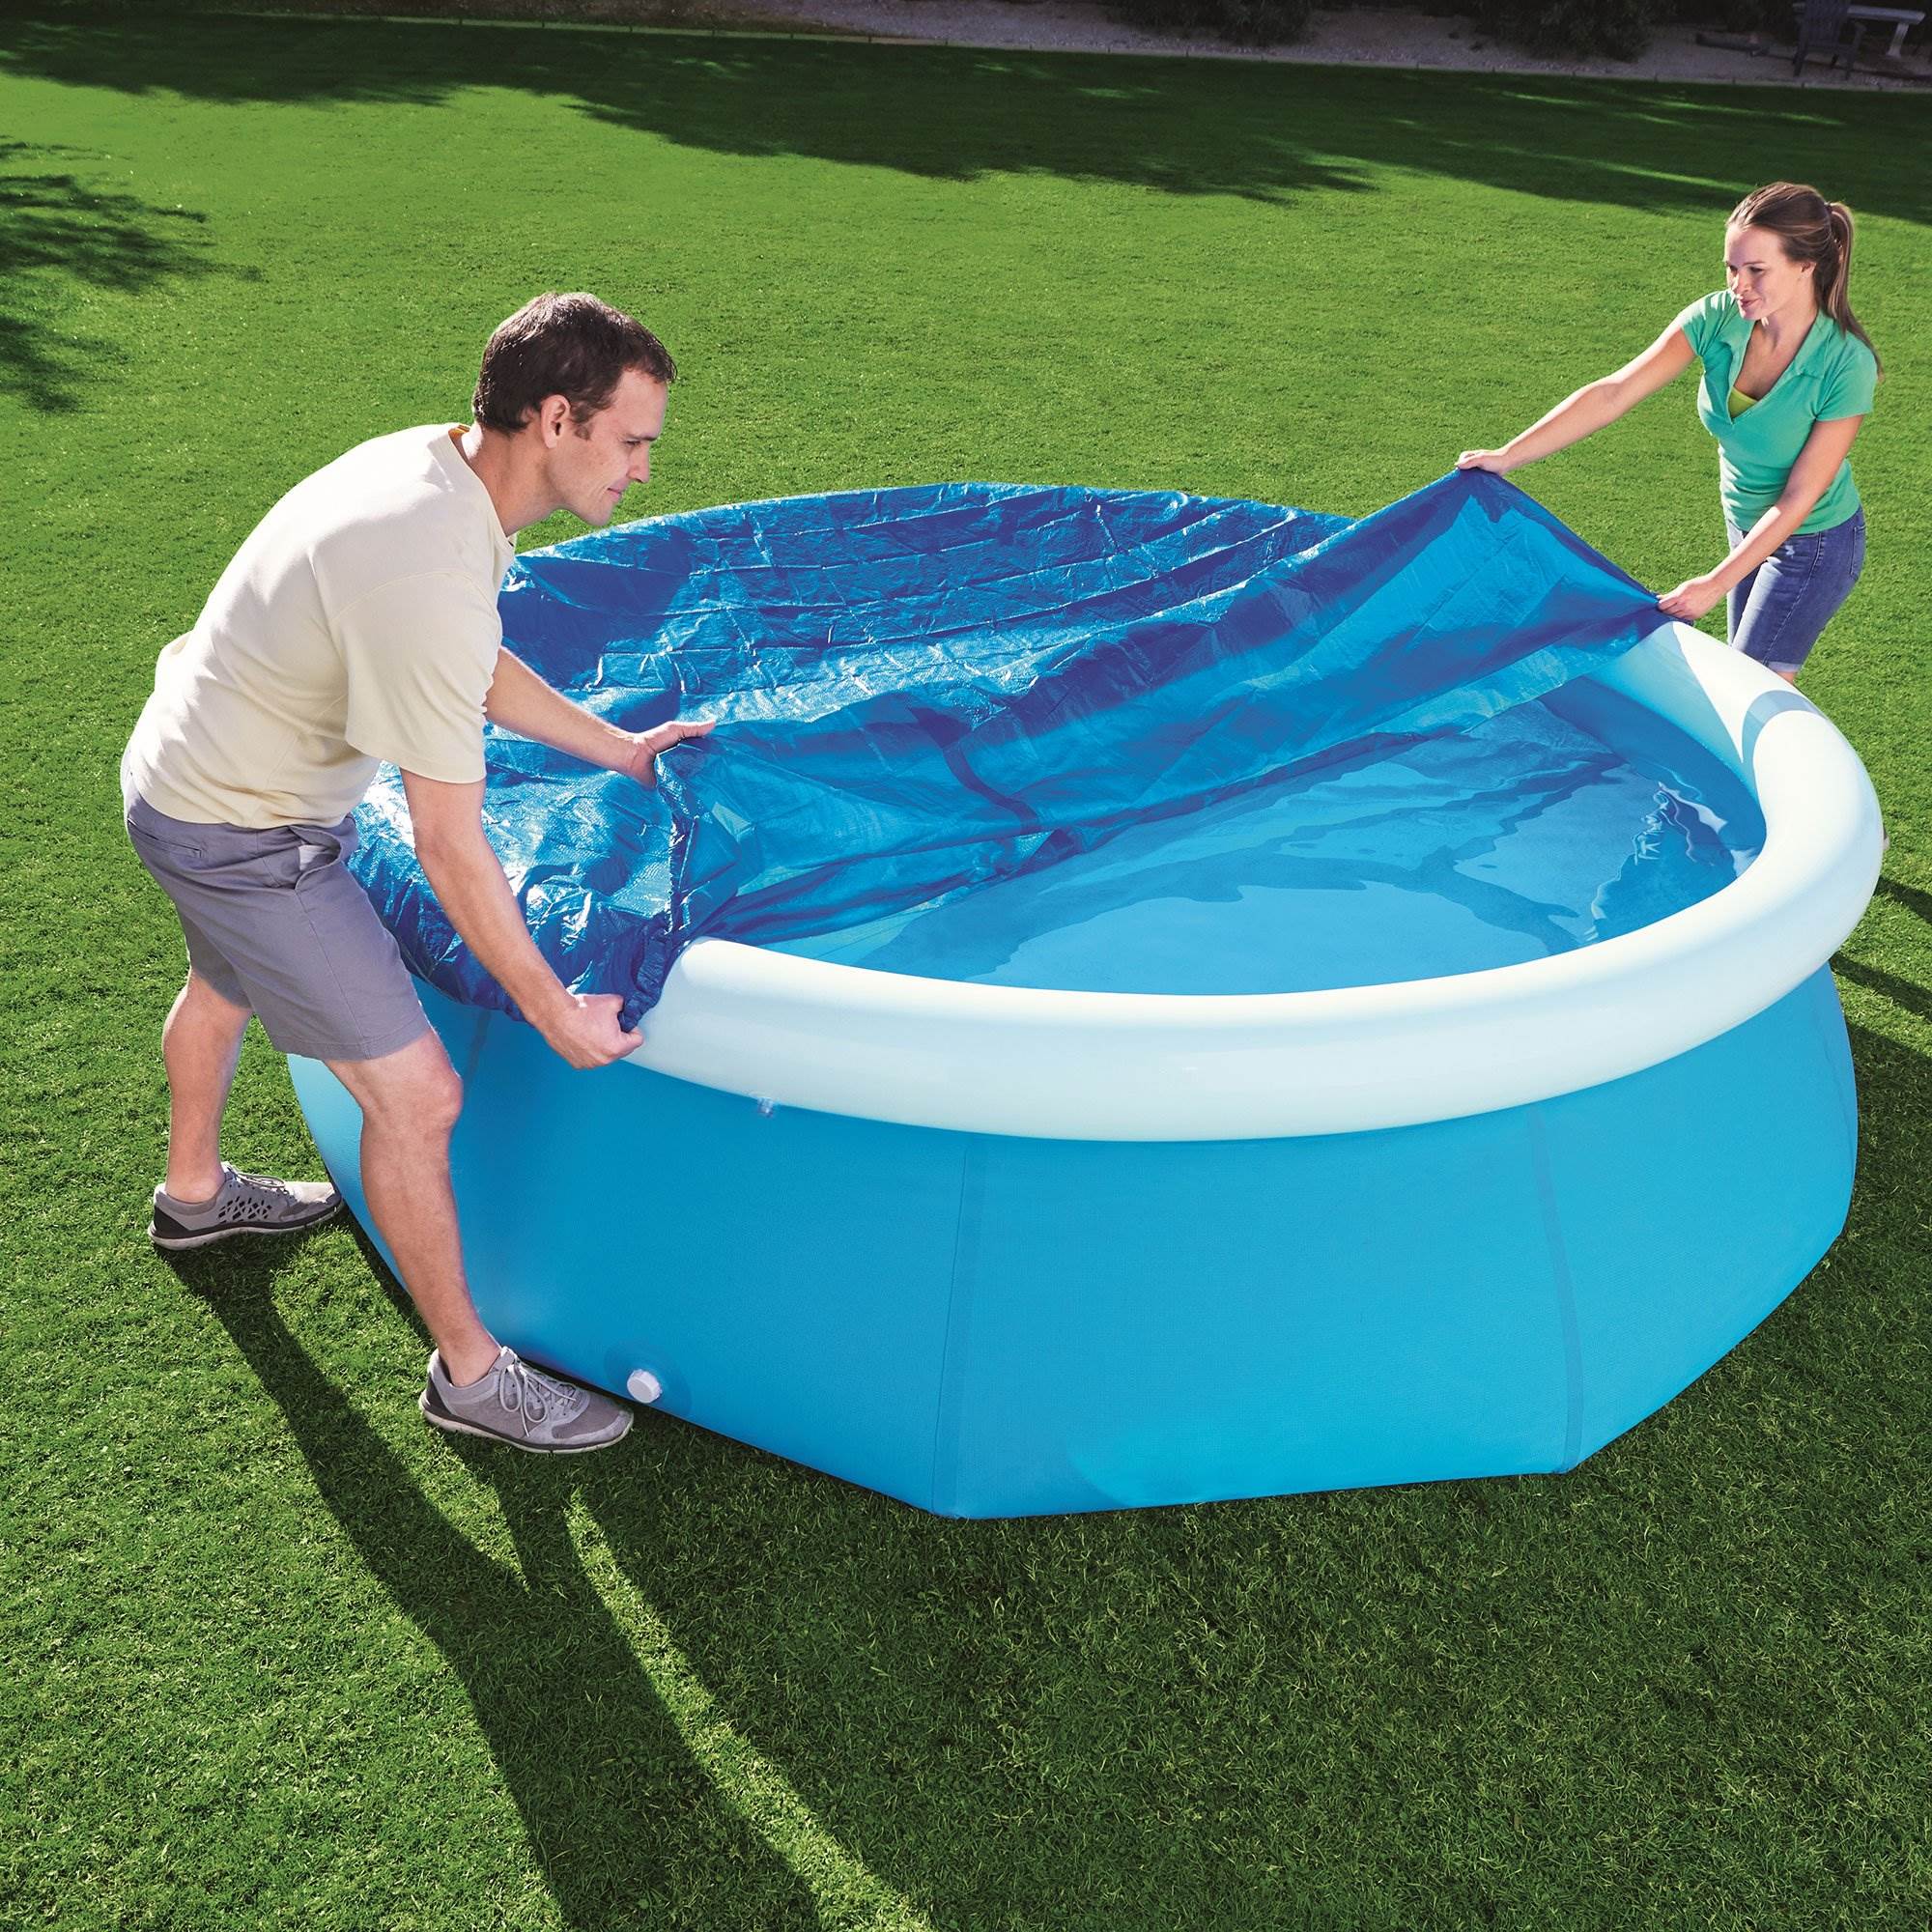 Bestway Flowclear Fast Set 10 Foot Above Ground Pool Cover, Blue (Open Box) 821808580330 eBay